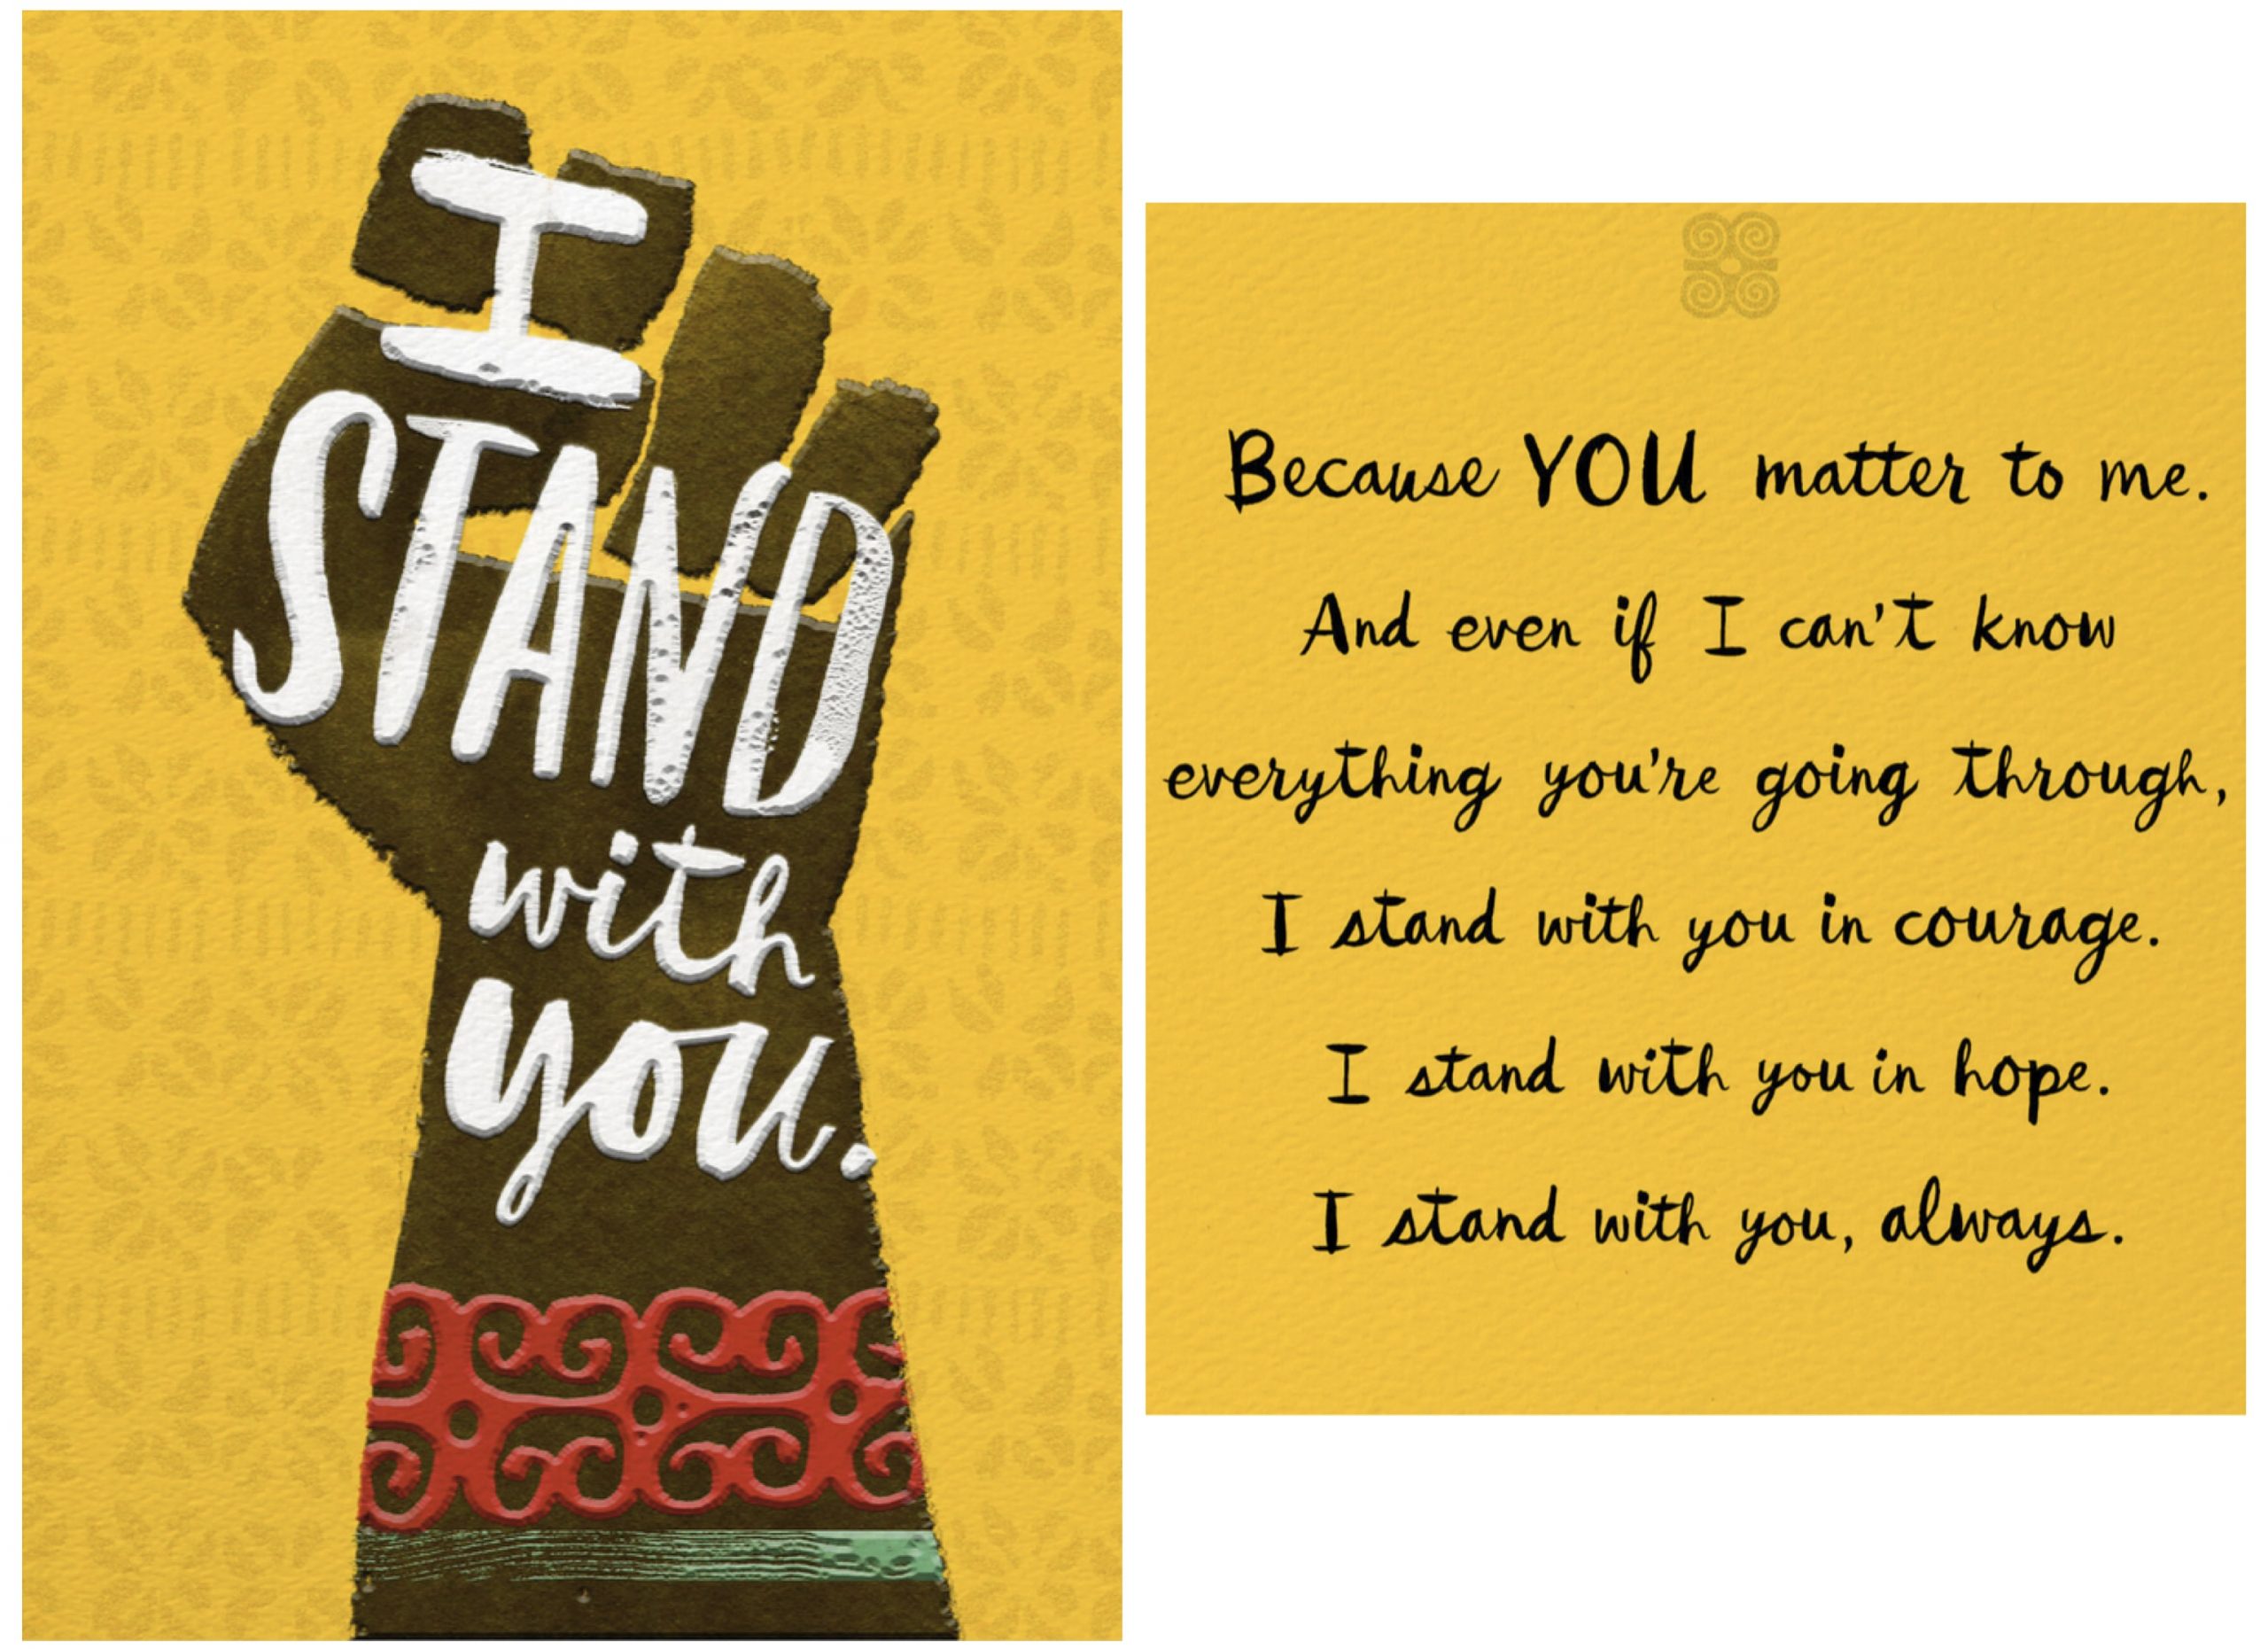 Greeting Card: Outer text, "I stand with you." Inner text, "Because YOU matter to me. And even if I can't know everything you're going through, I stand with you in courage. I stand with you in hope. I stand with you, always."